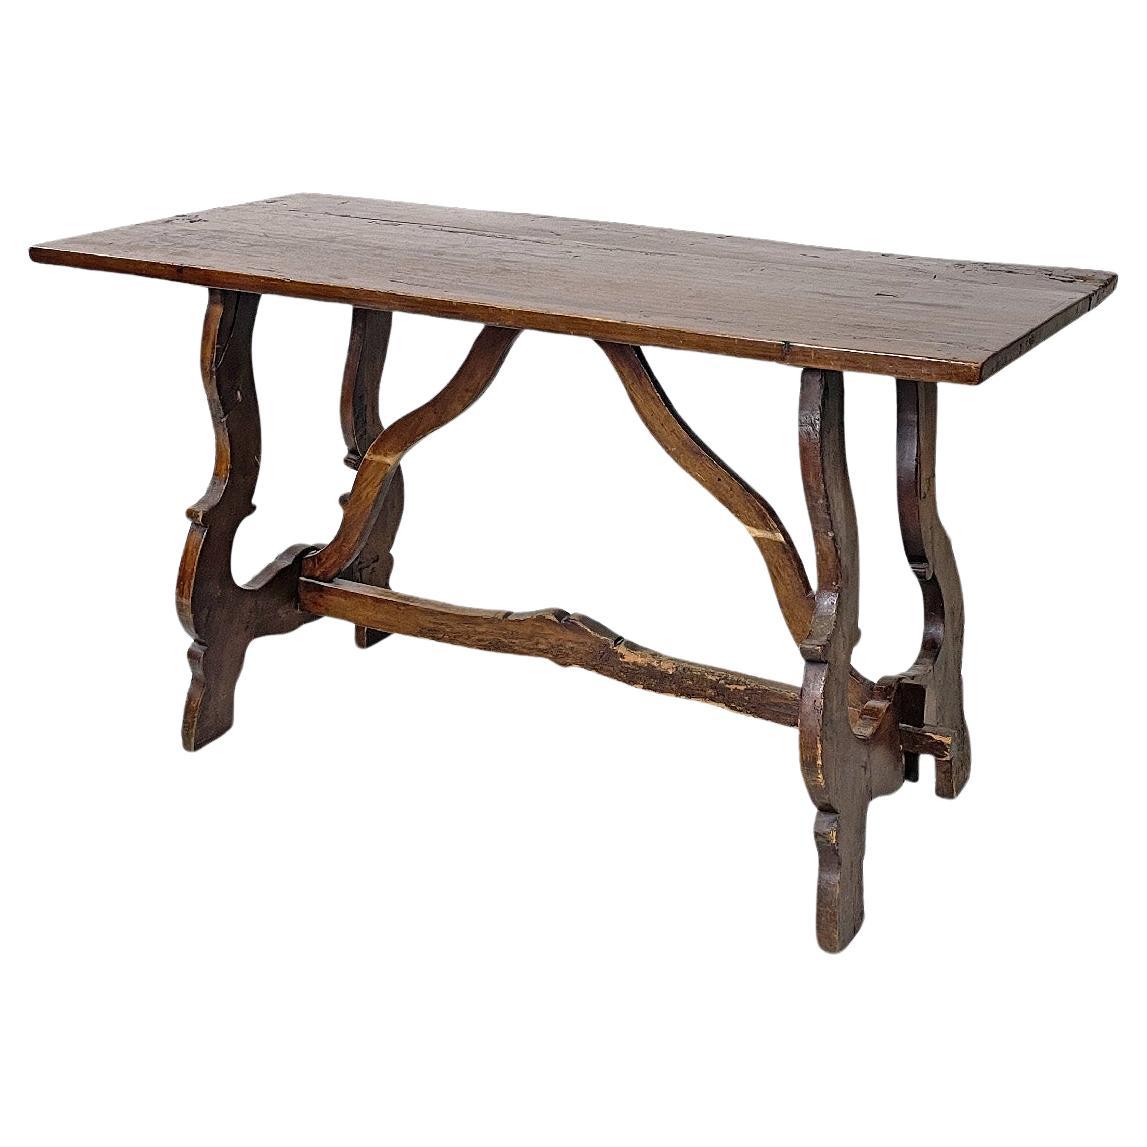 Italian antique wooden table with lyre legs, 1800s  For Sale